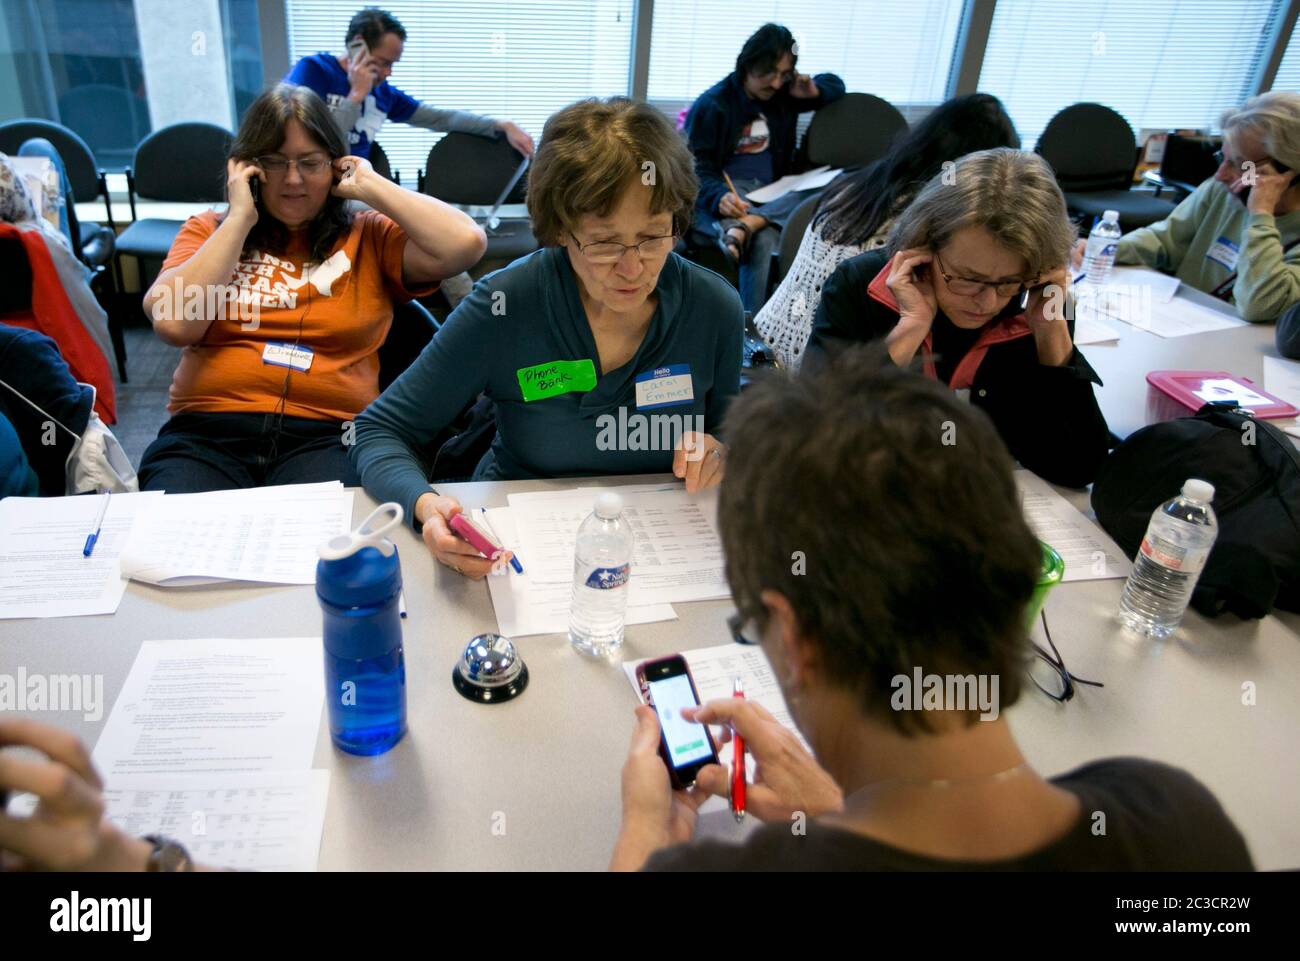 Austin Texas USA, Nov. 23 2013: Volunteers for Battleground Texas and the state Democratic Party make phone calls to potential voters in an attempt to 'turn Texas blue.' Texas has been a solidly 'red' Republican state for almost 20 years. ©MKC/Bob Daemmrich Photography, Inc. Stock Photo